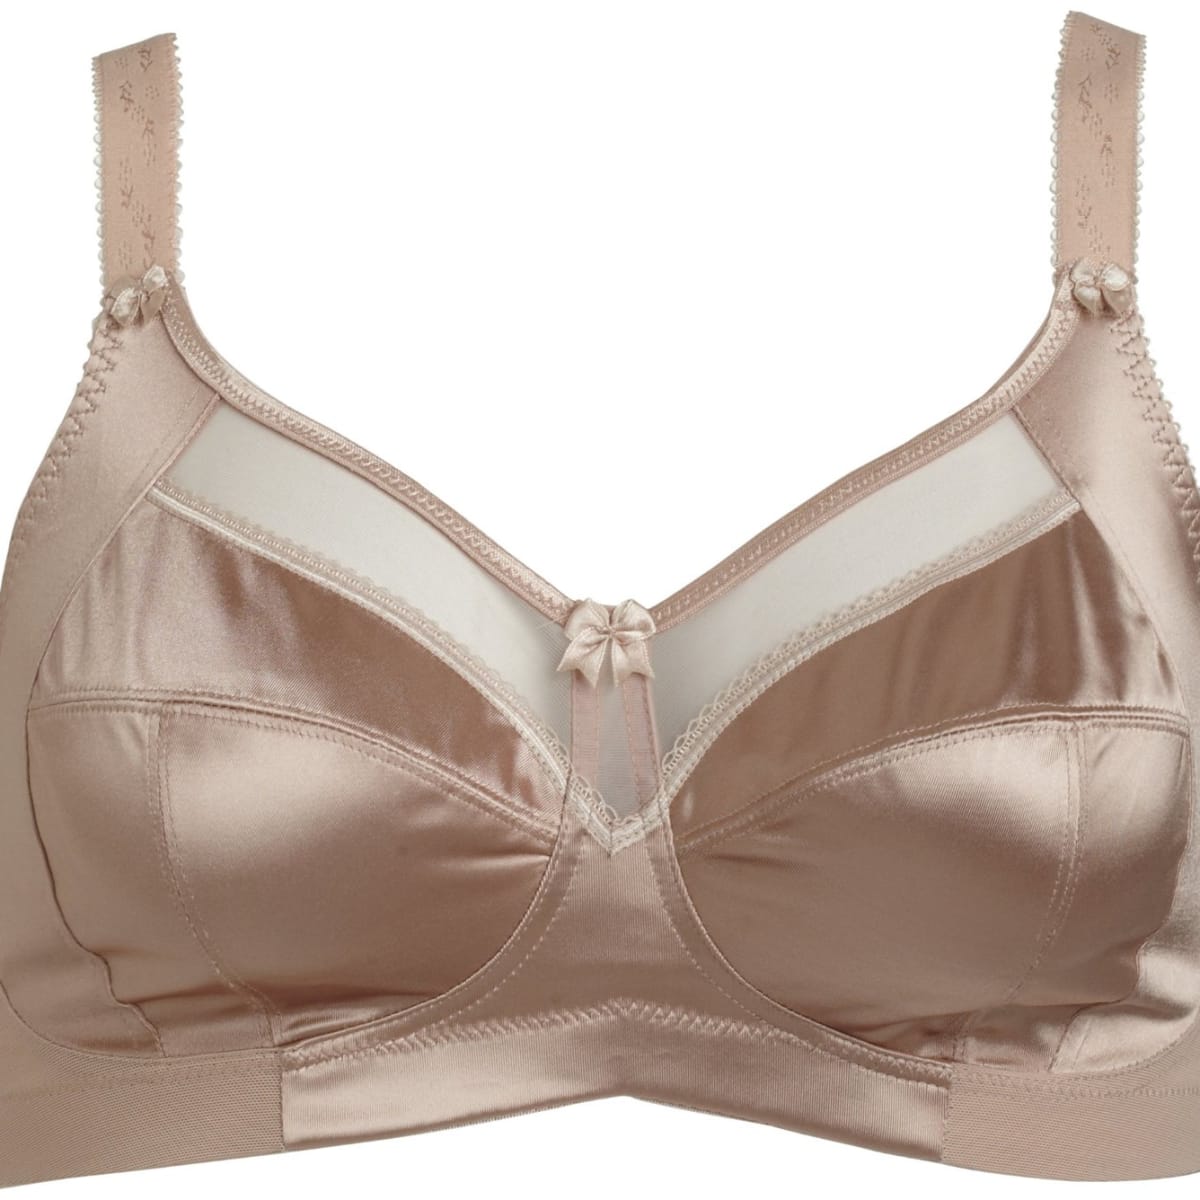 DDD Bras: Best Triple D Bras and Where to Find Them - HubPages